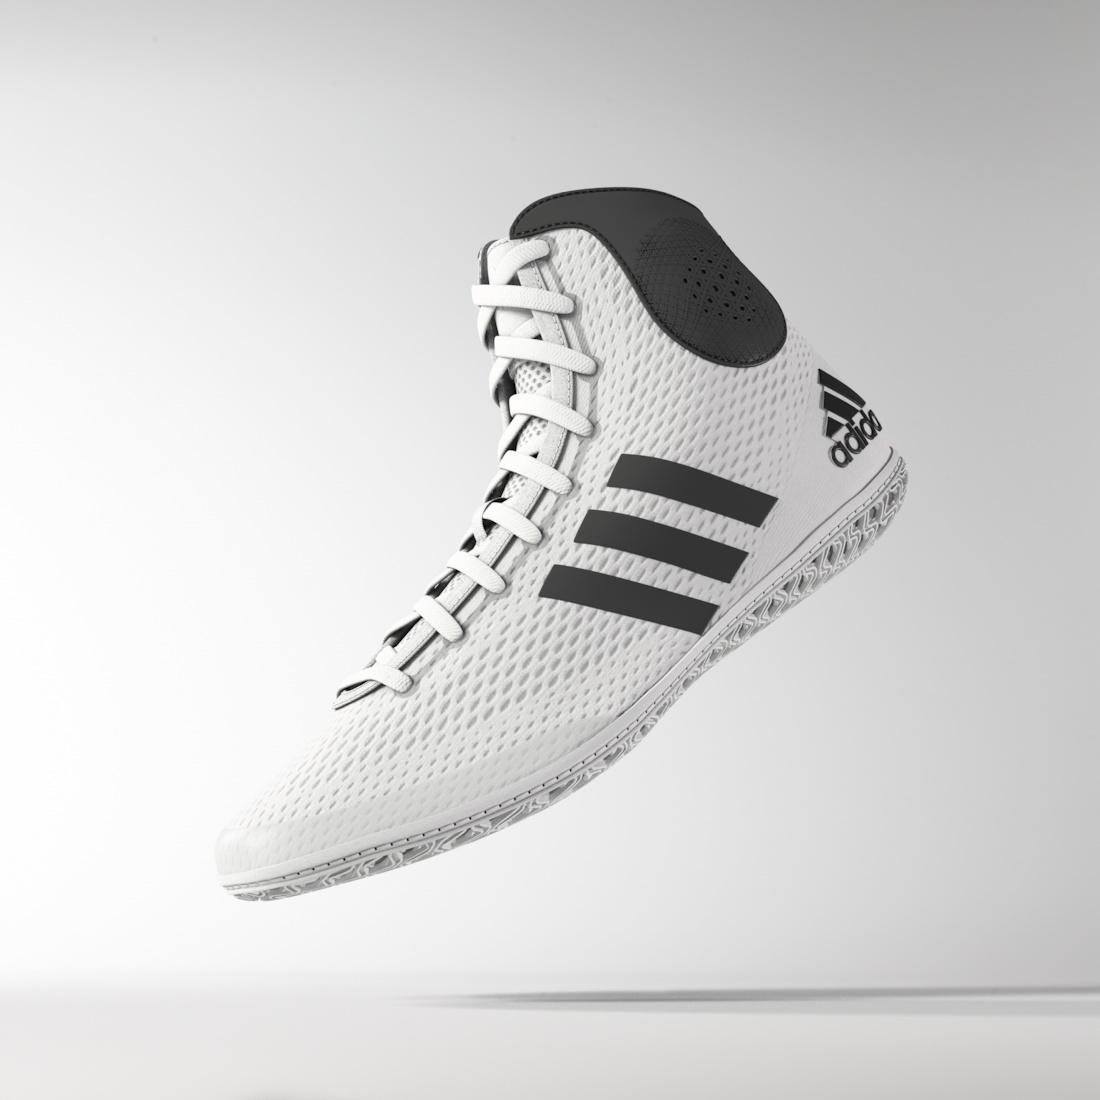 adidas Tech Fall Wrestling Shoes, color: White/Black